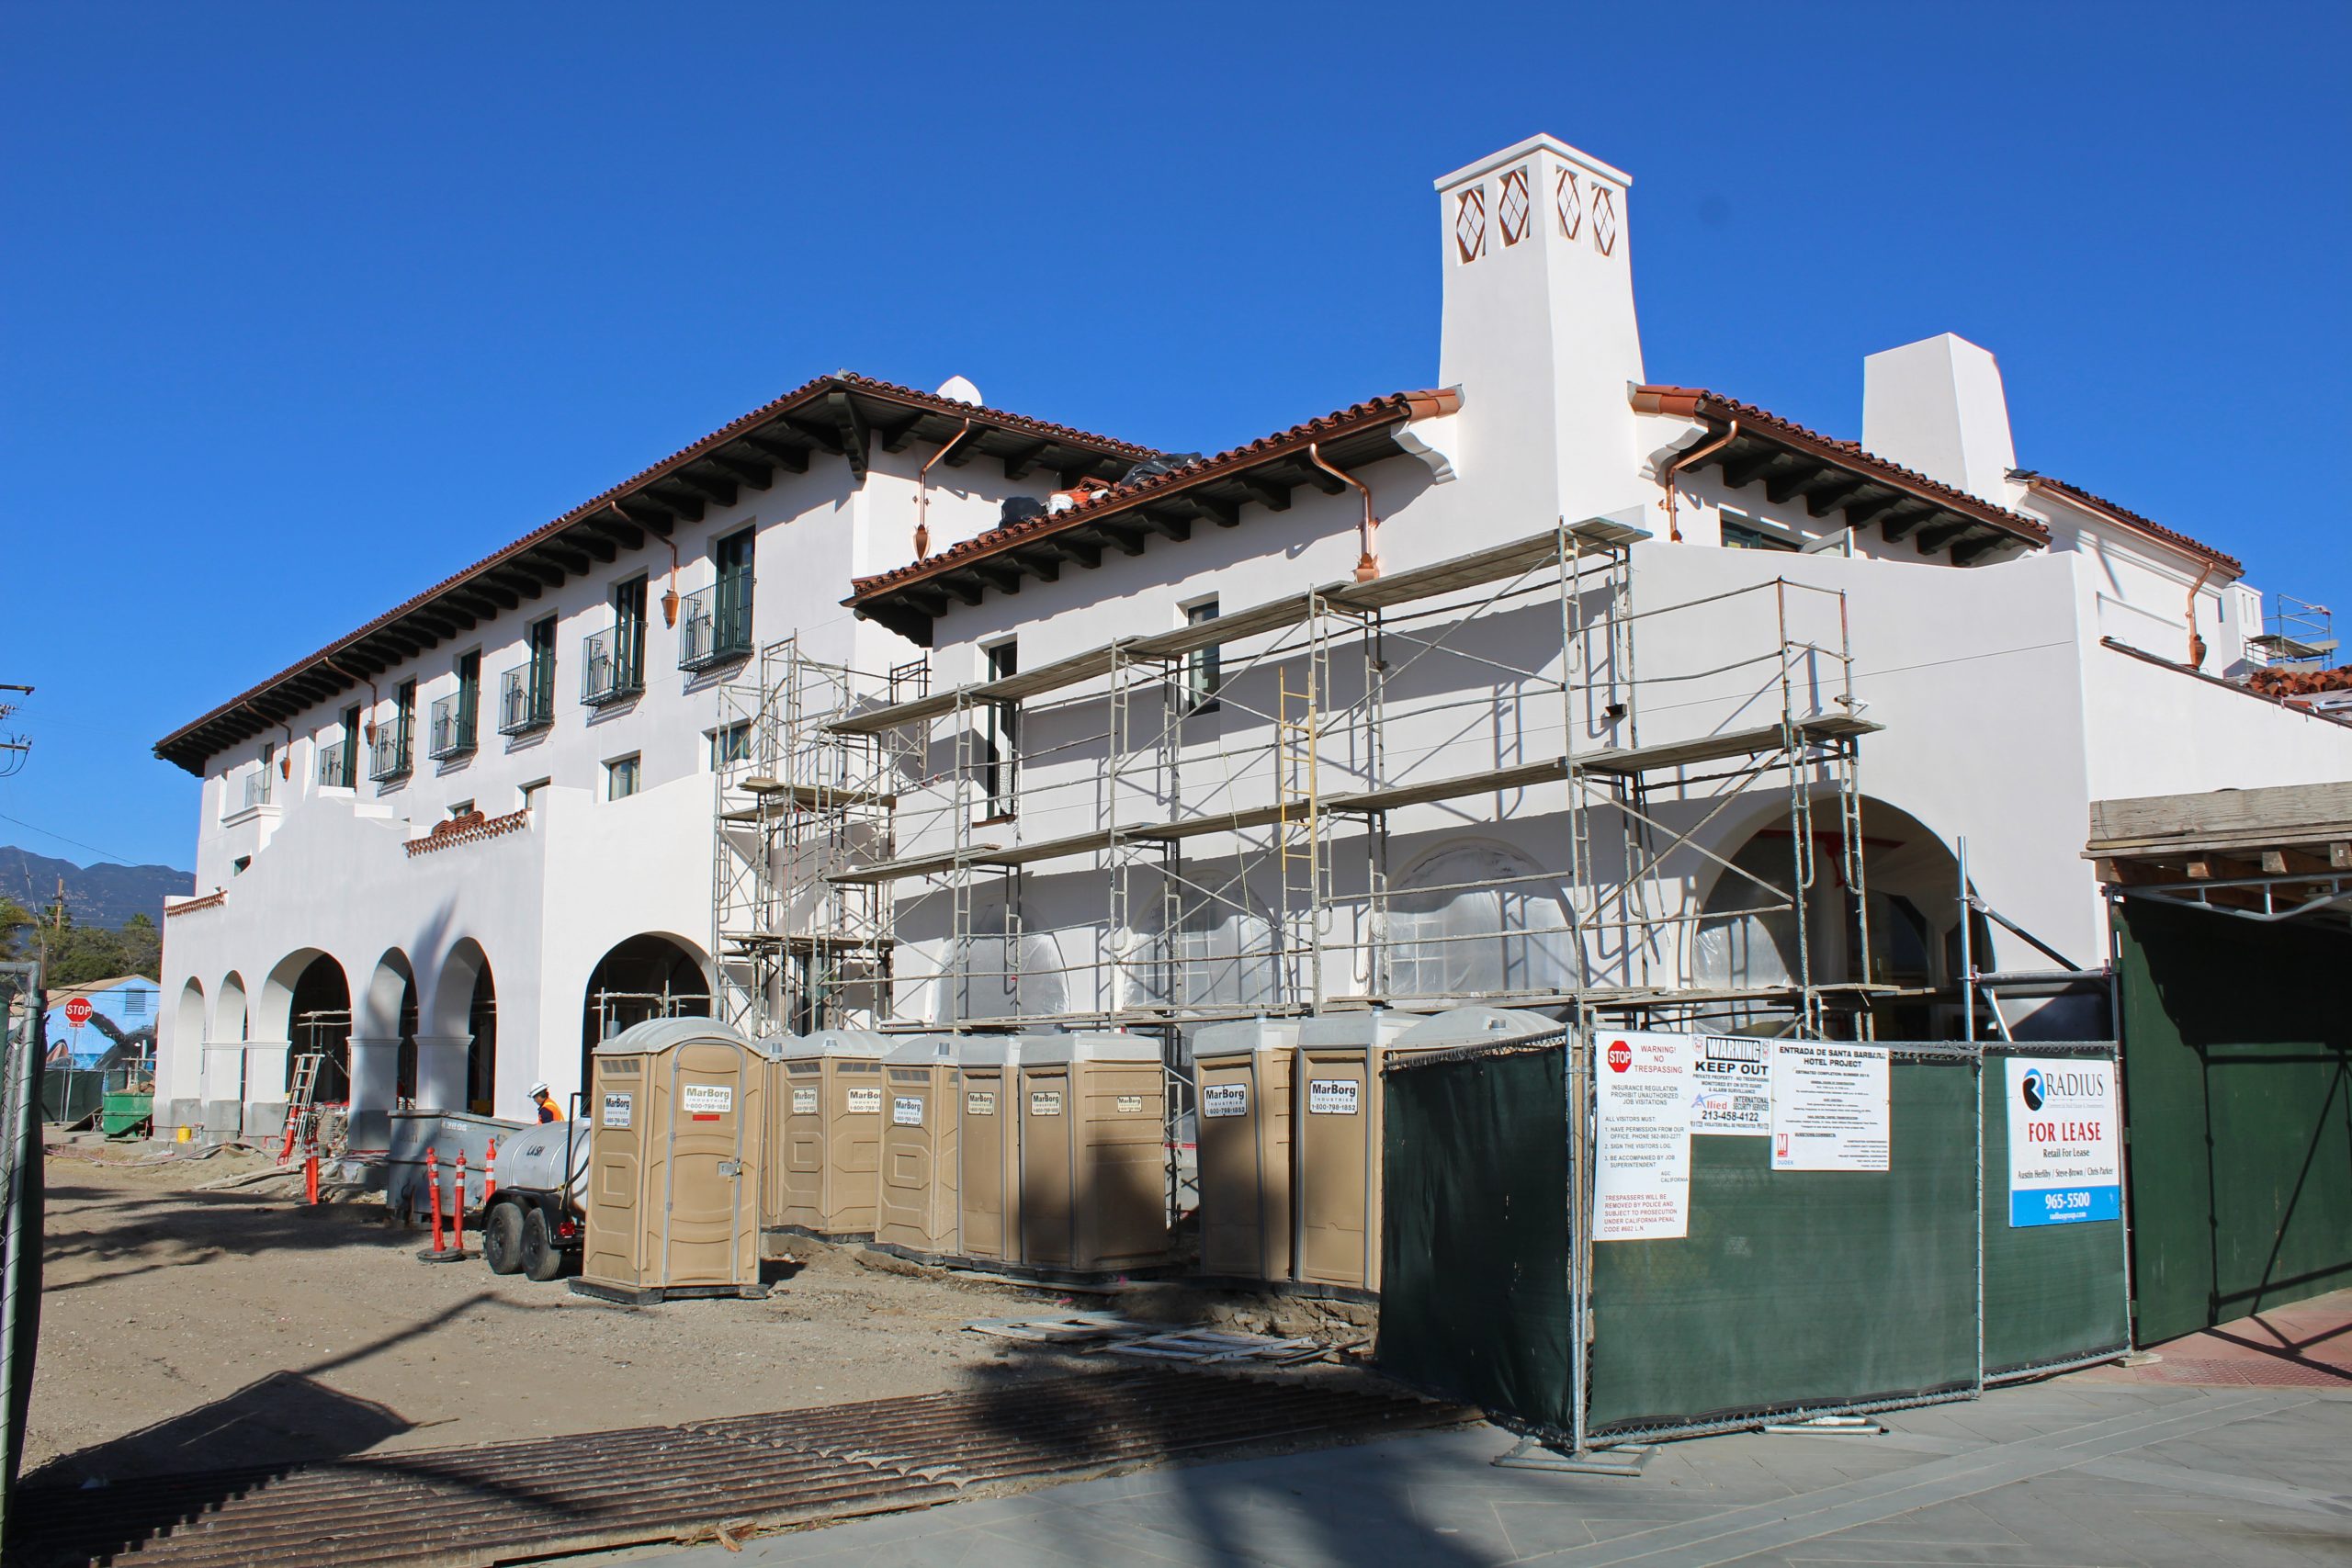 The 121-room Hotel Californian is slated to open its three buildings this summer by Santa Barbara’s waterfront.